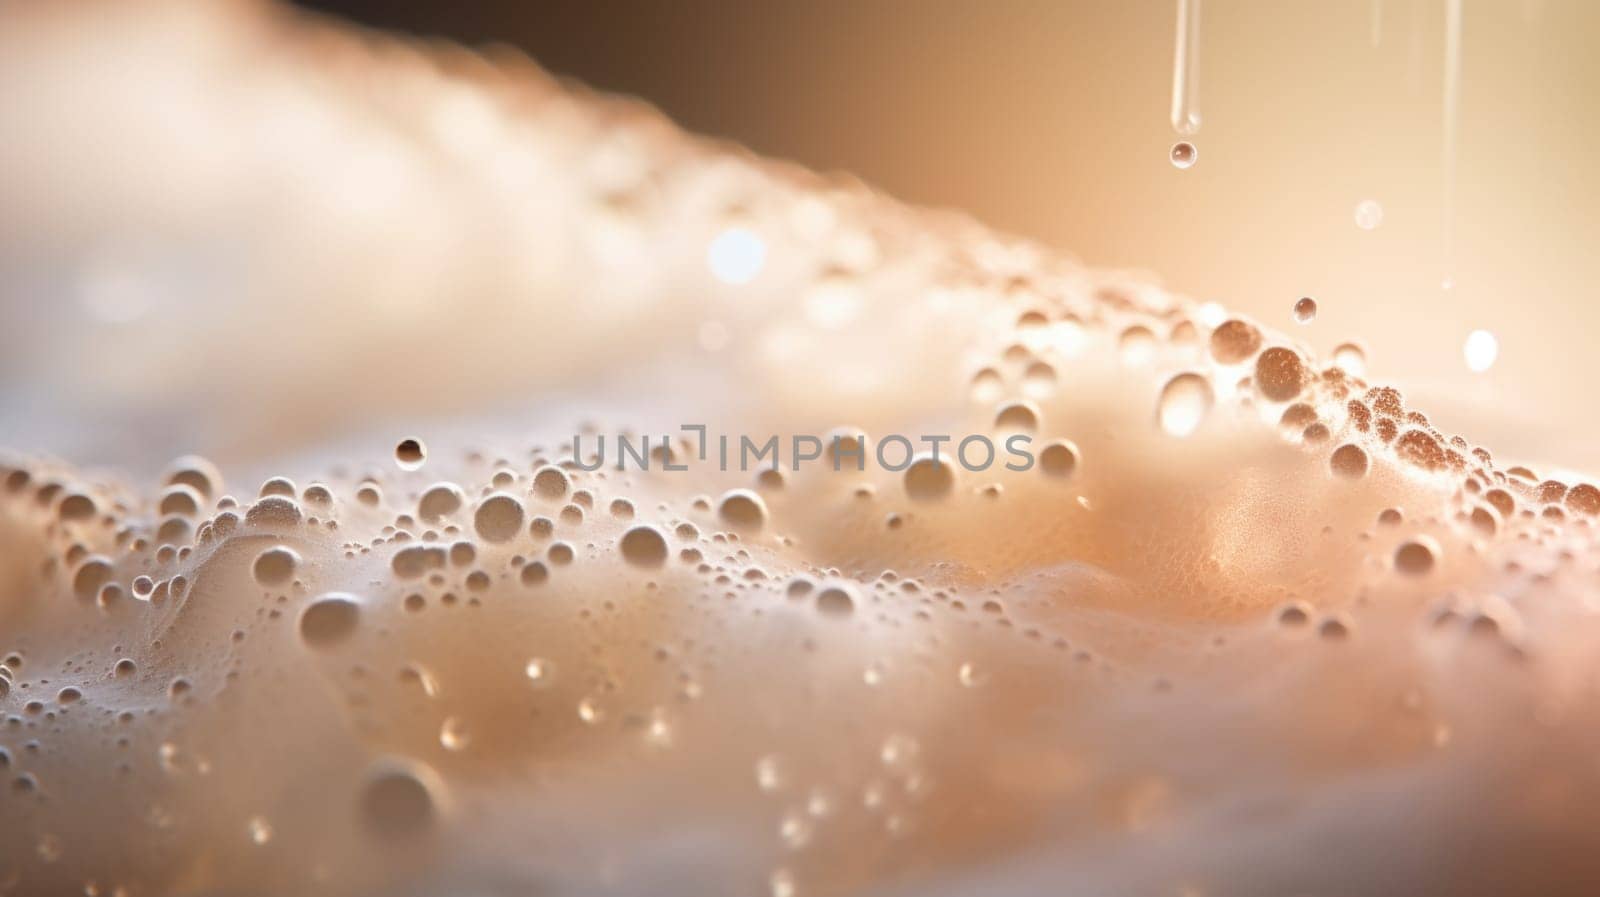 A close up of bubbles in a glass of milk